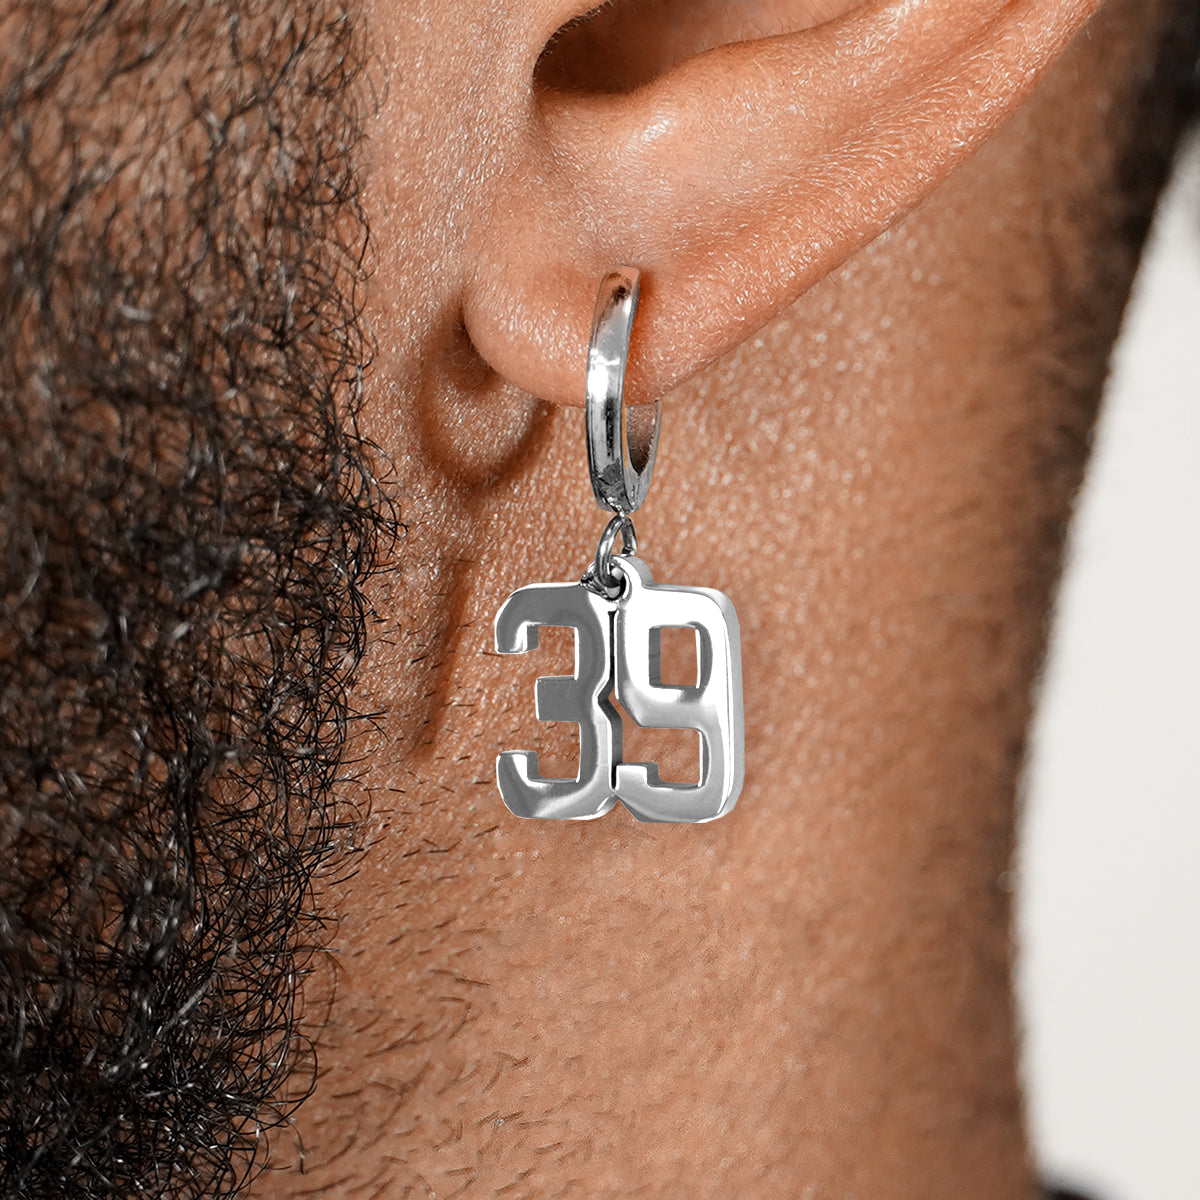 39 Number Earring - Stainless Steel